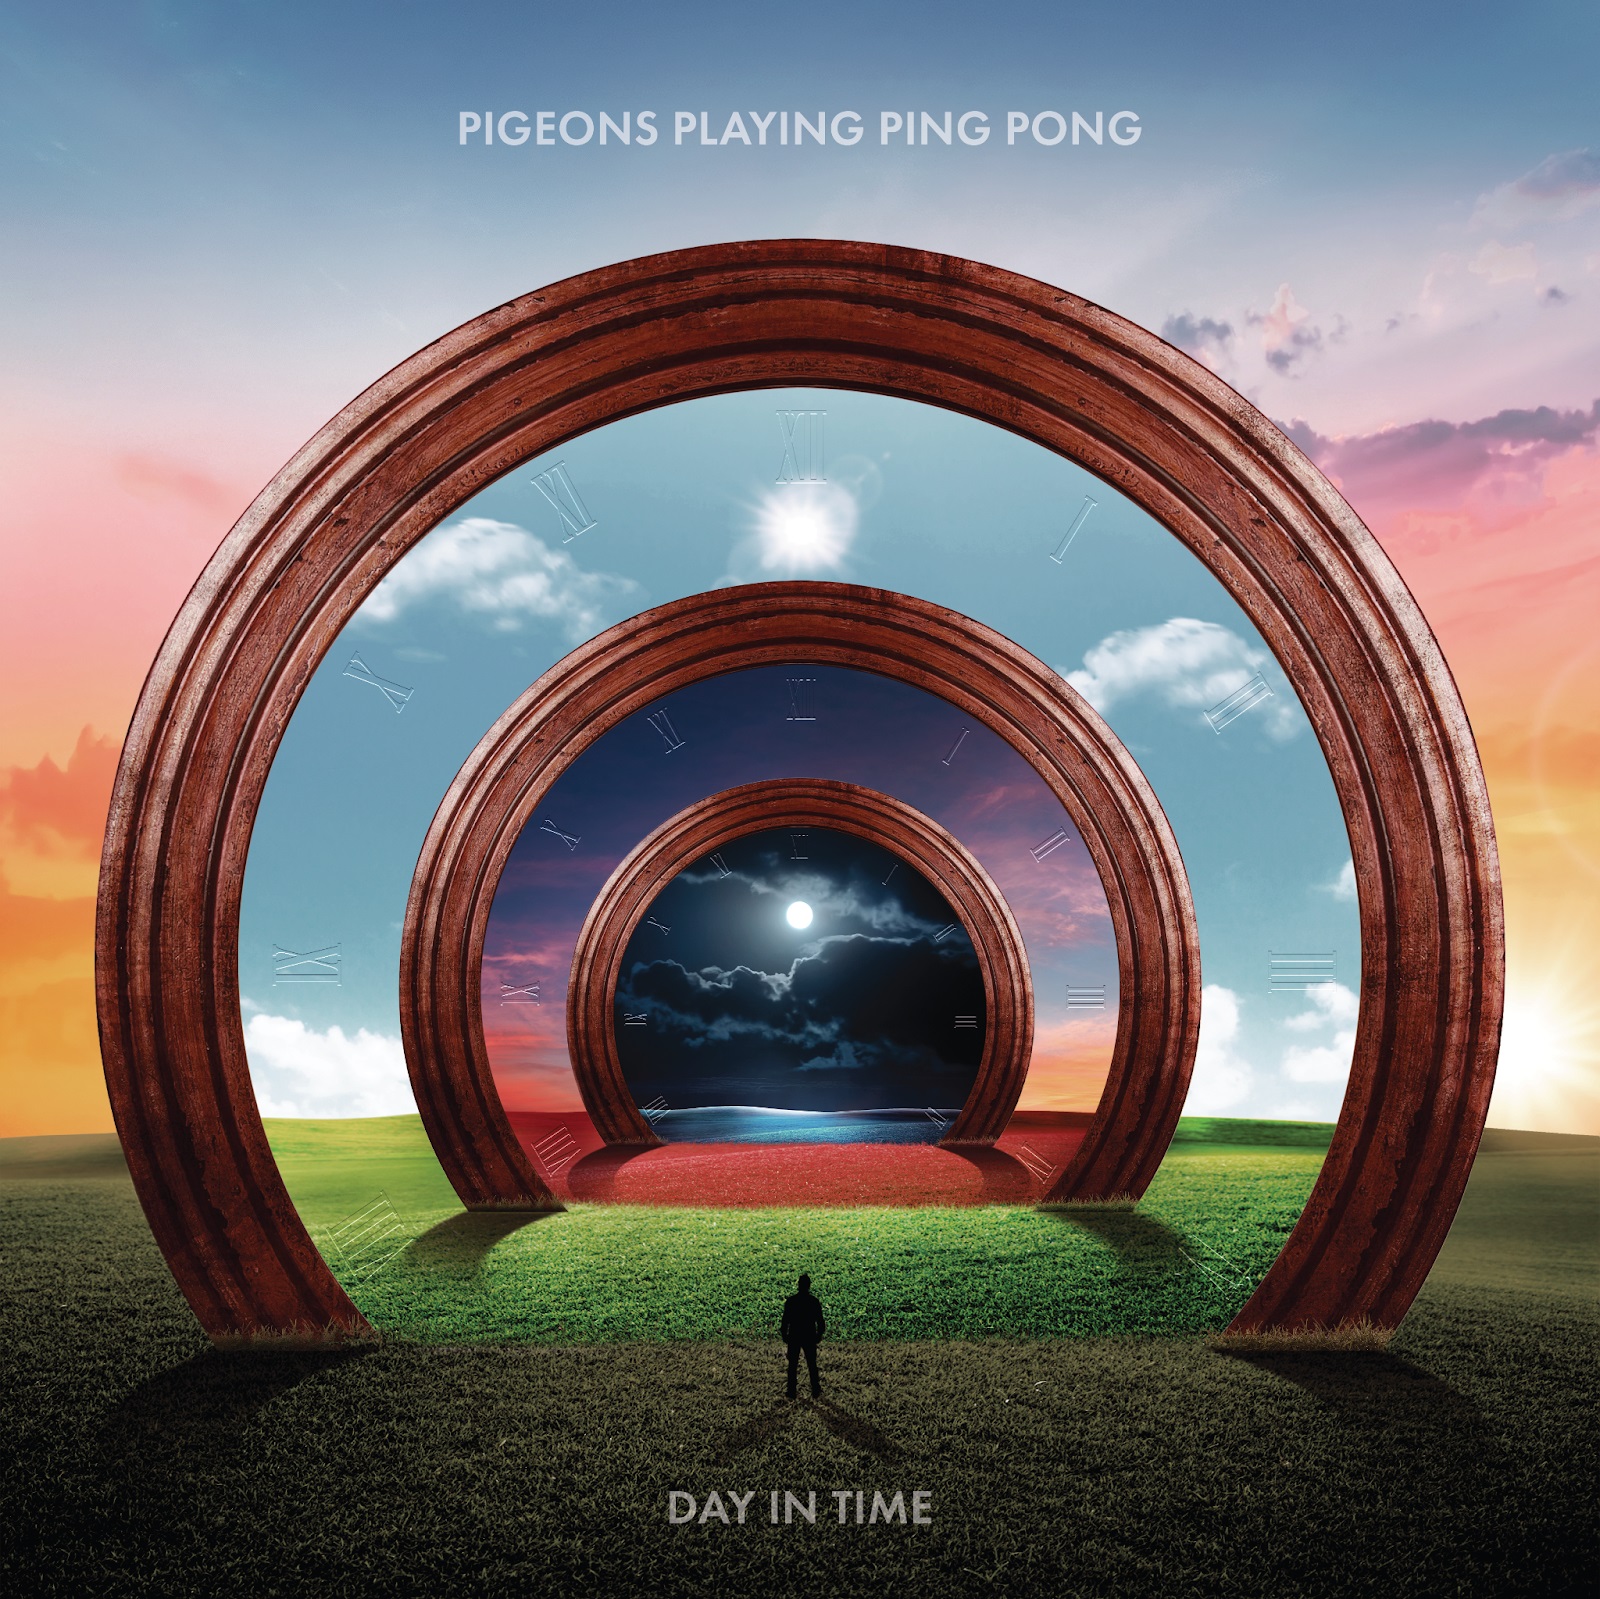 Pigeons Playing Ping Pong Announce Studio Album, Day In Time + New Single